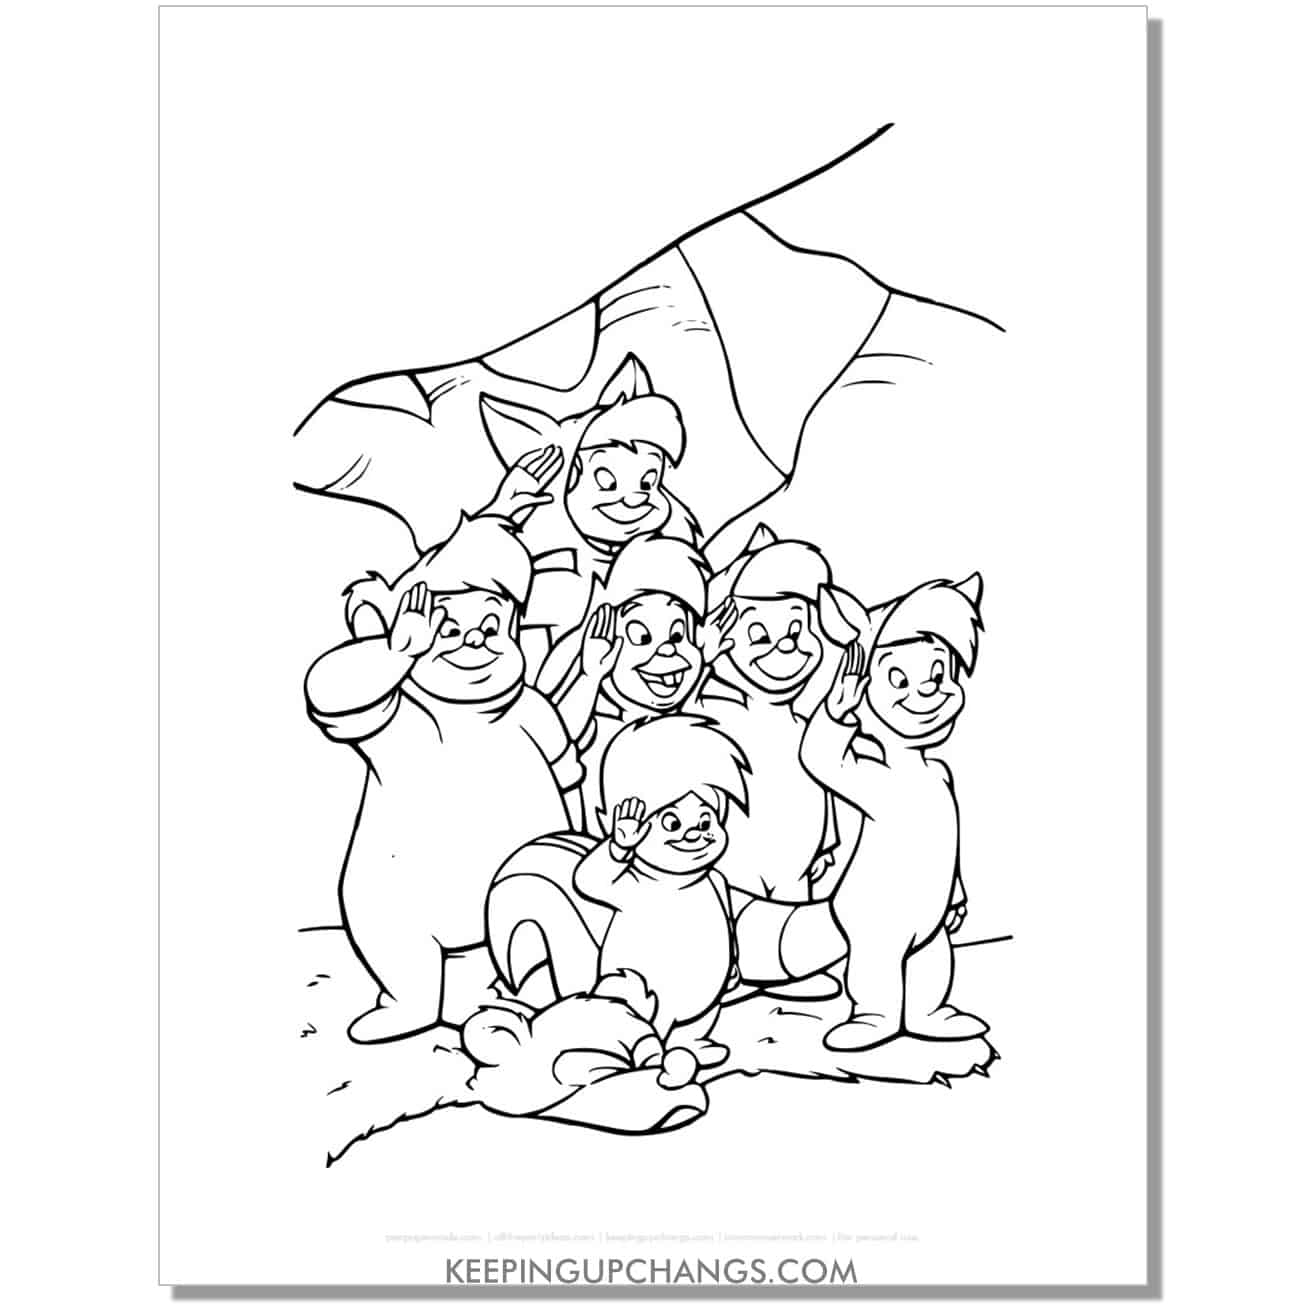 lost boys salute coloring page, sheet.